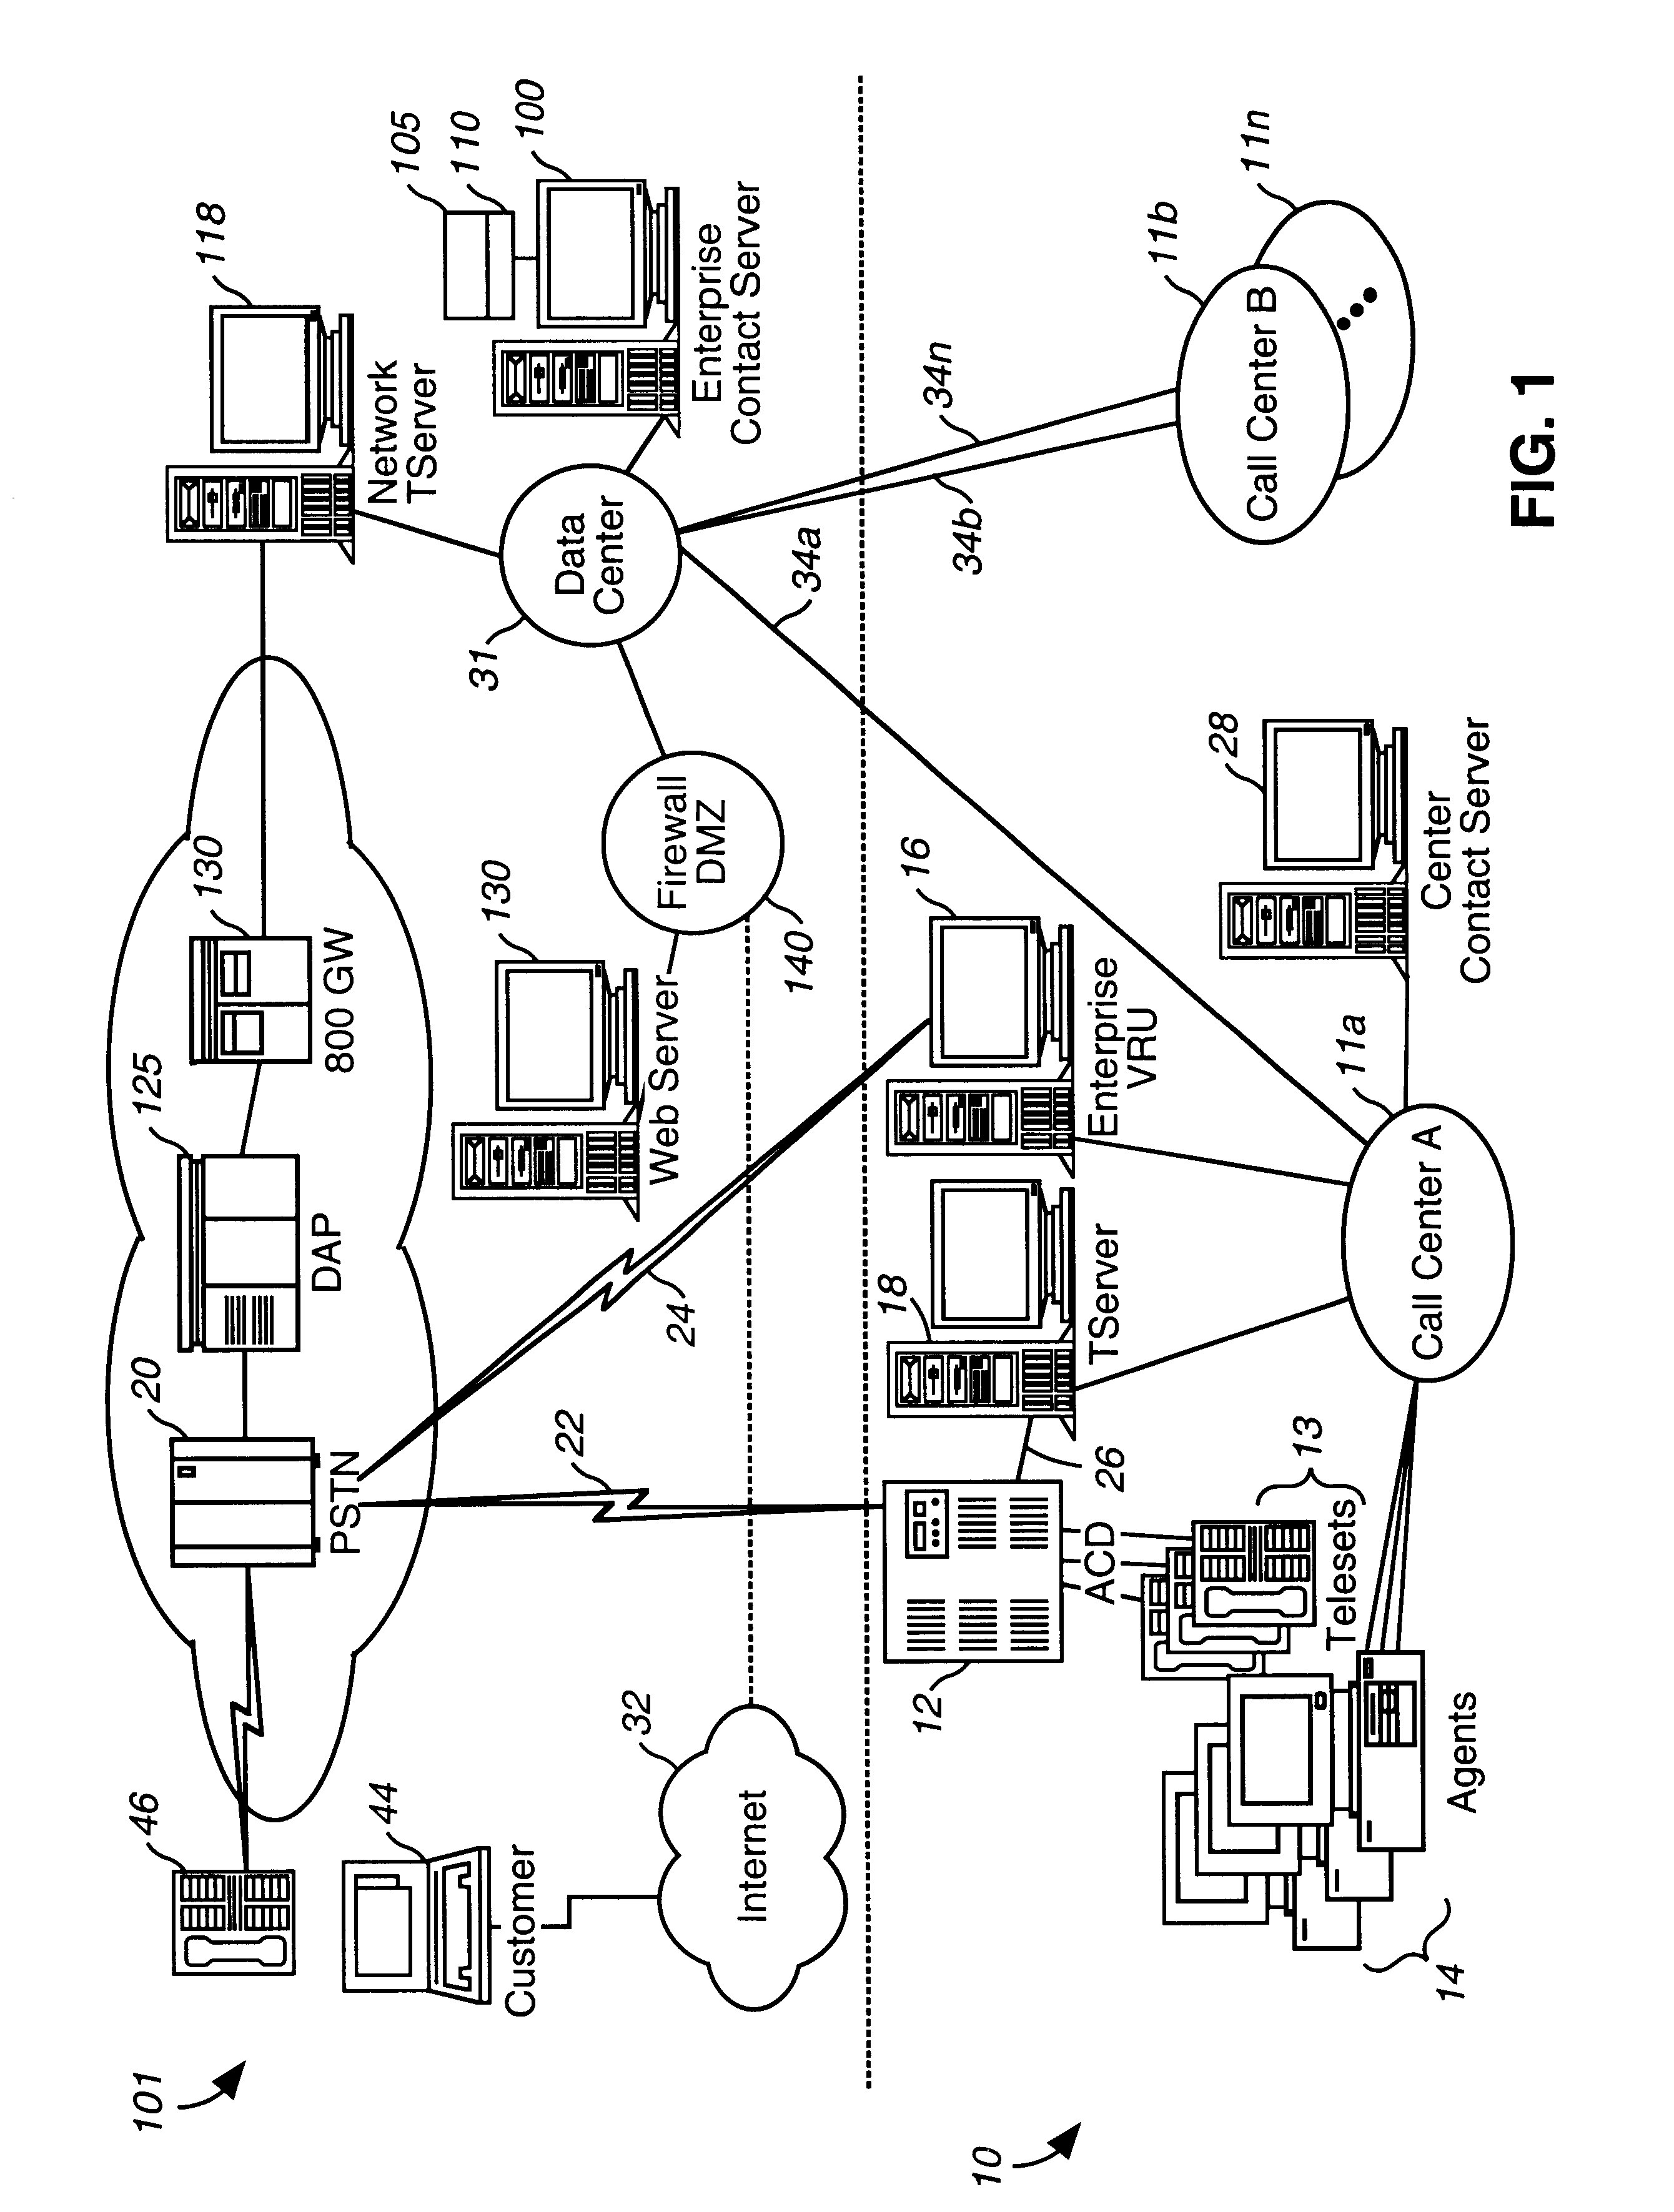 Enterprise contact server with enhanced routing features